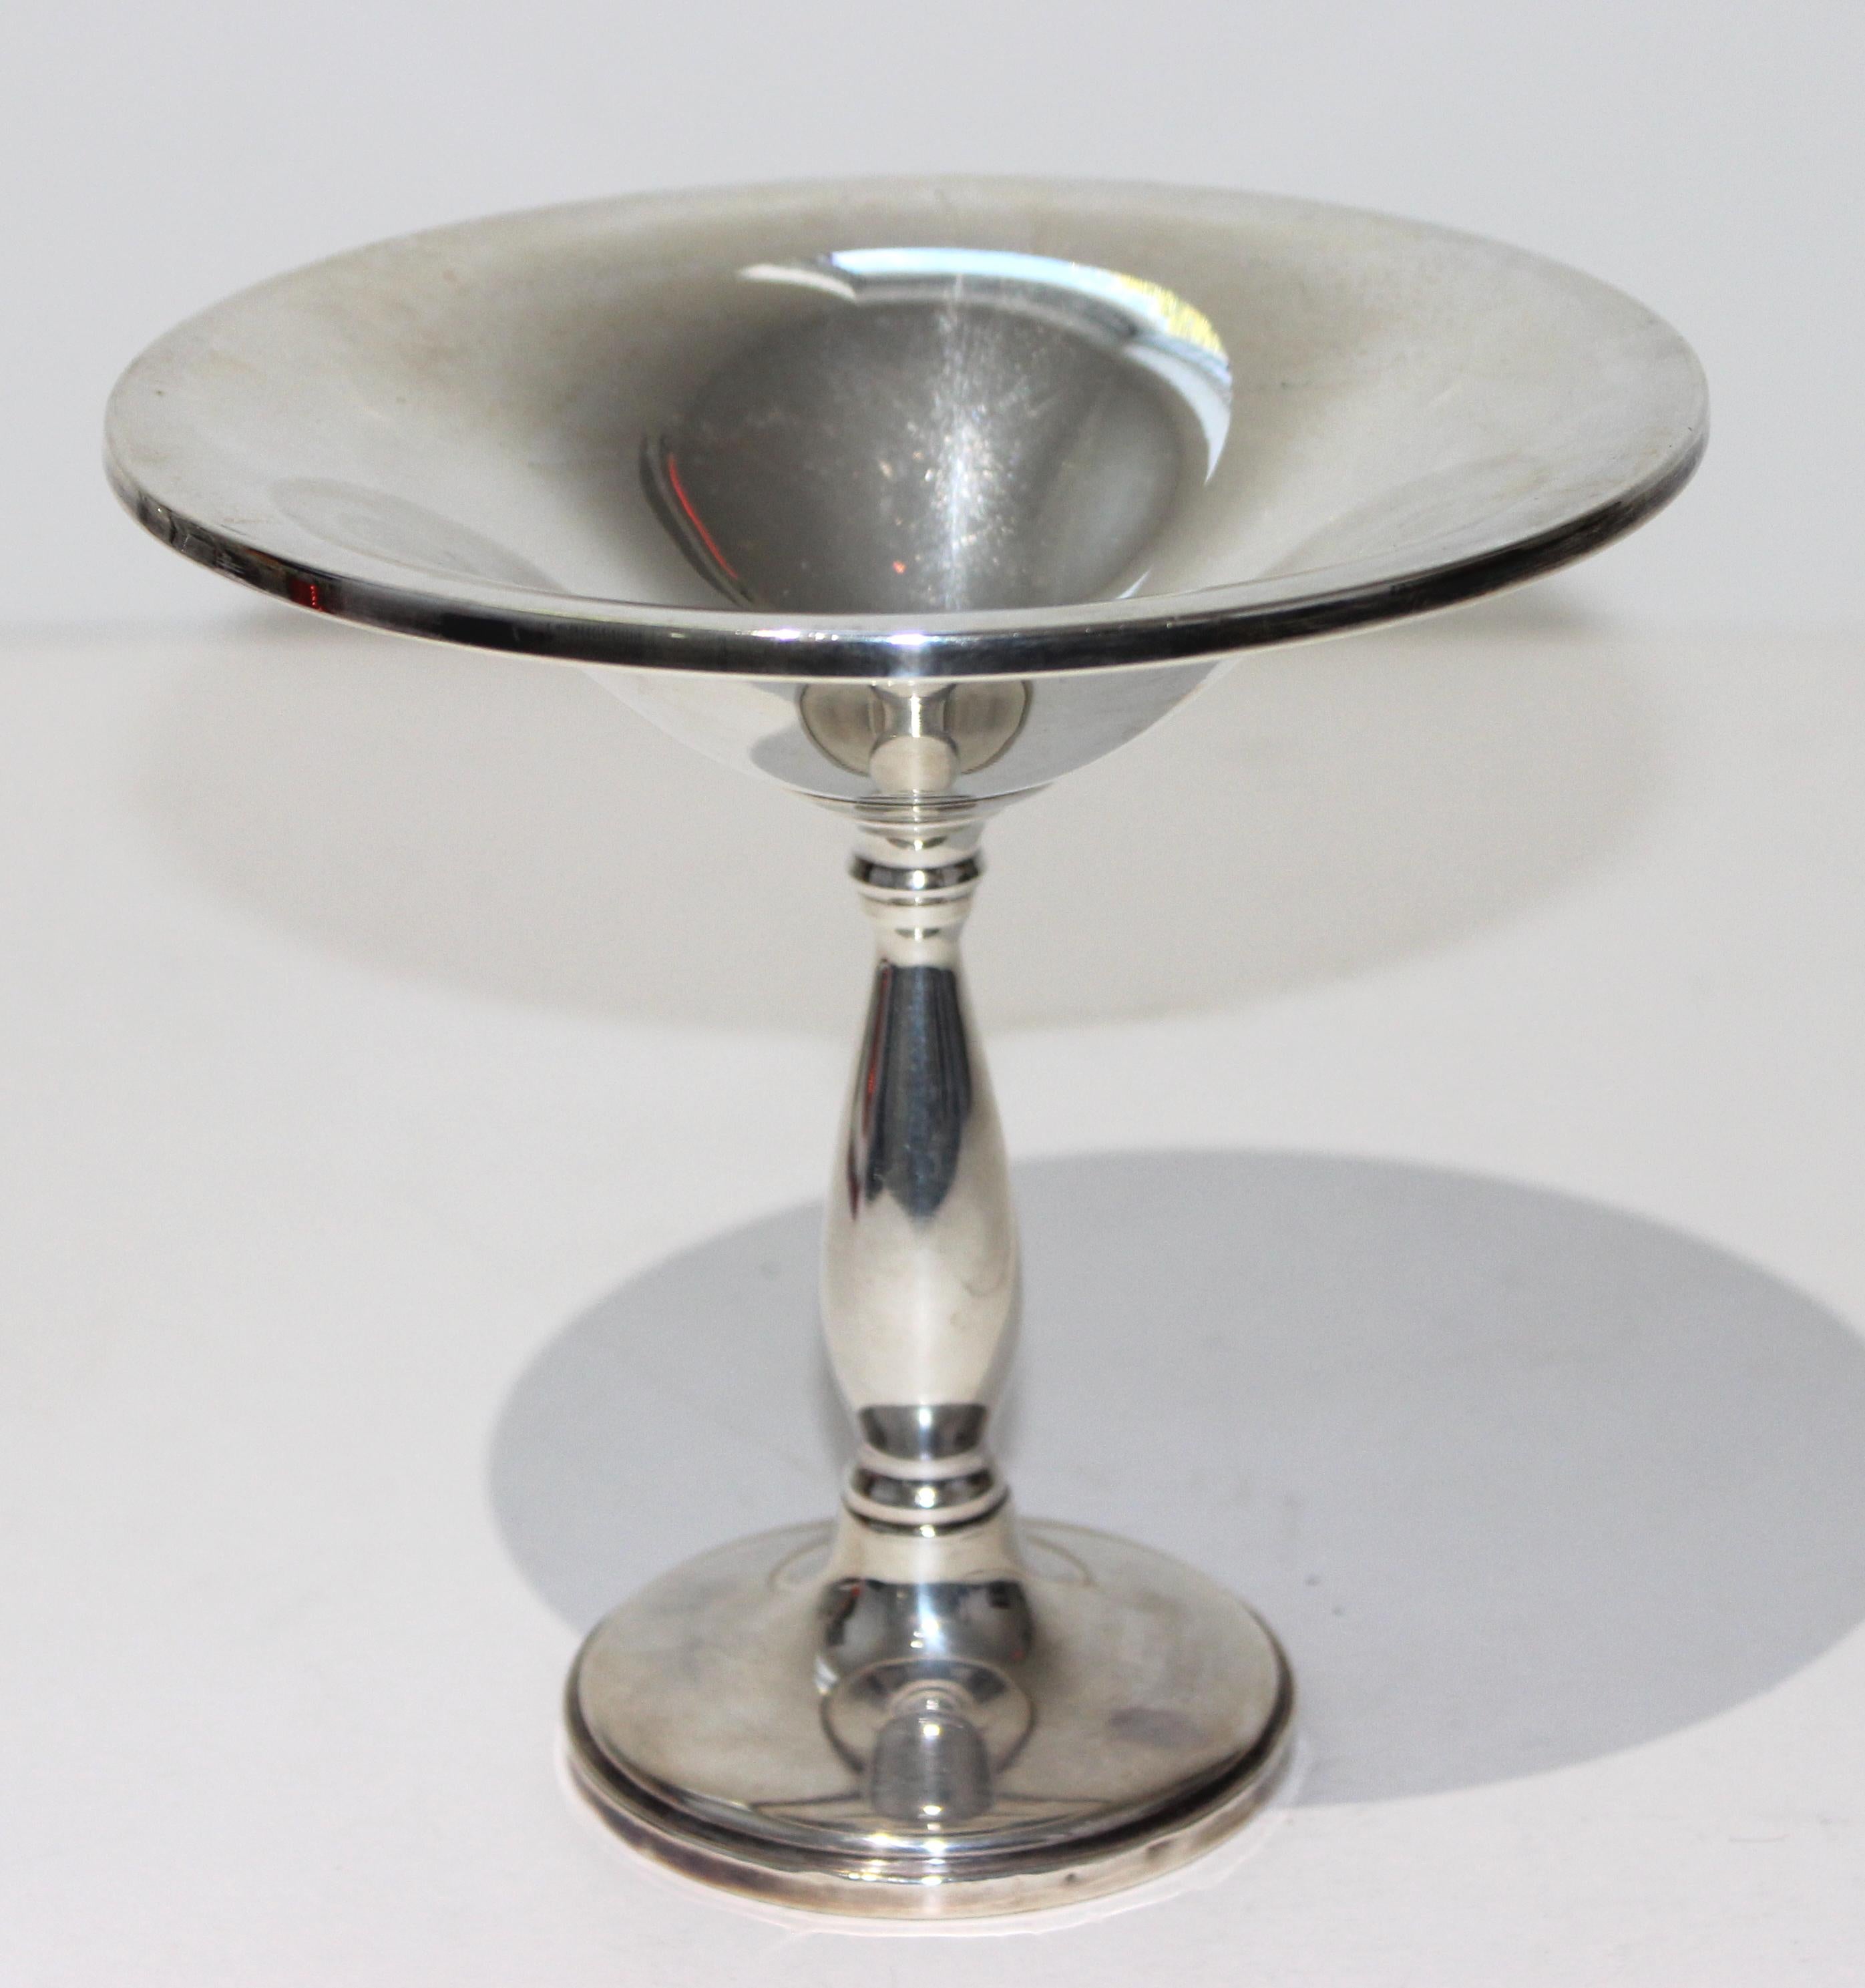 Stylish modern sterling silver compote - note the design where the top edge is turned down - from a Palm Beach estate.

Weight is 7.6 oz.